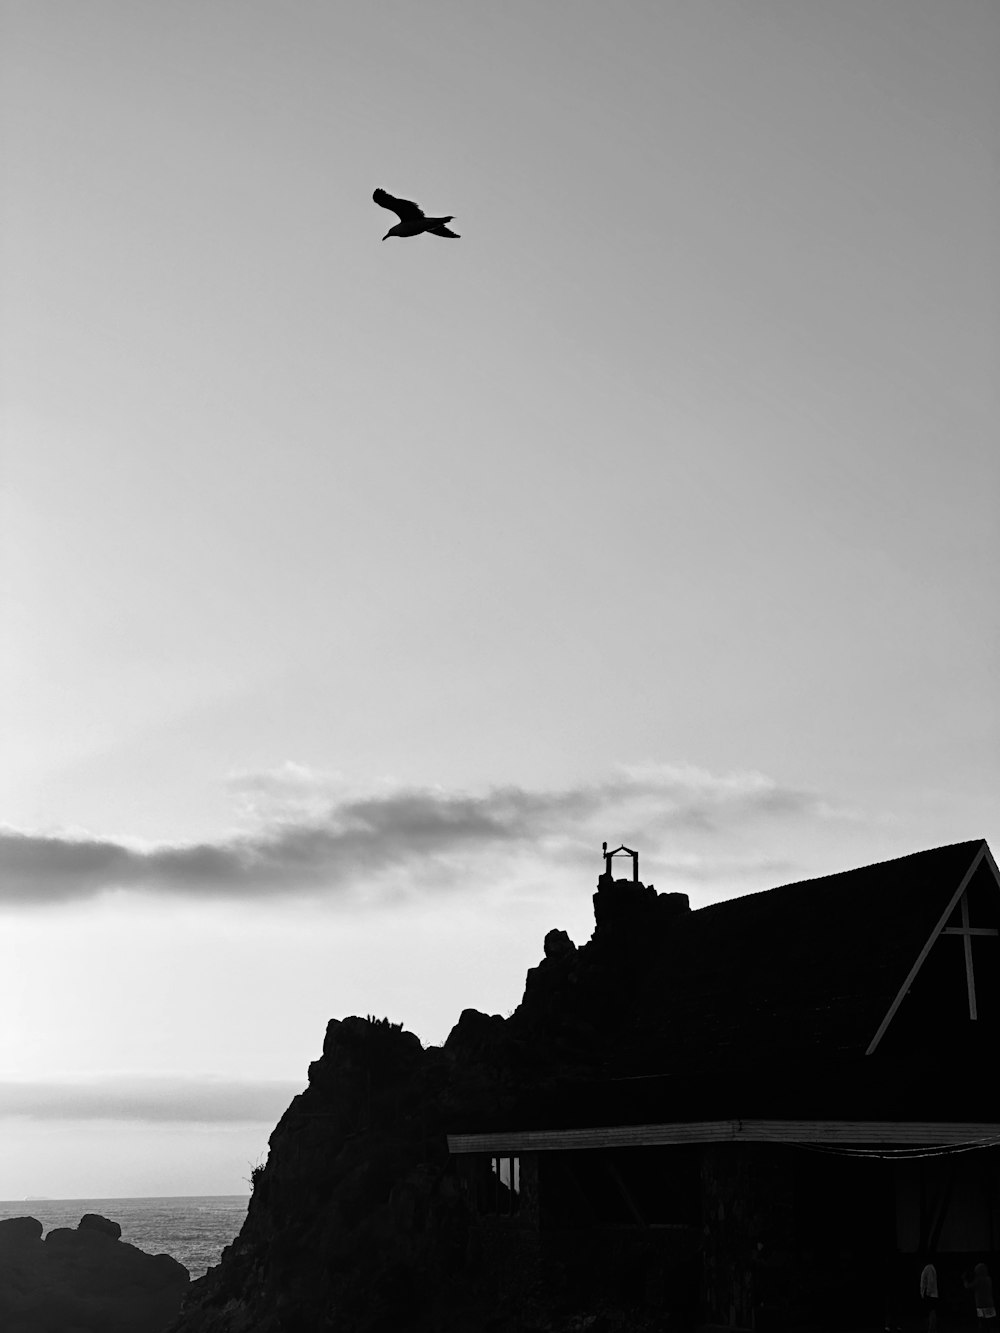 a black and white photo of a bird flying over a house